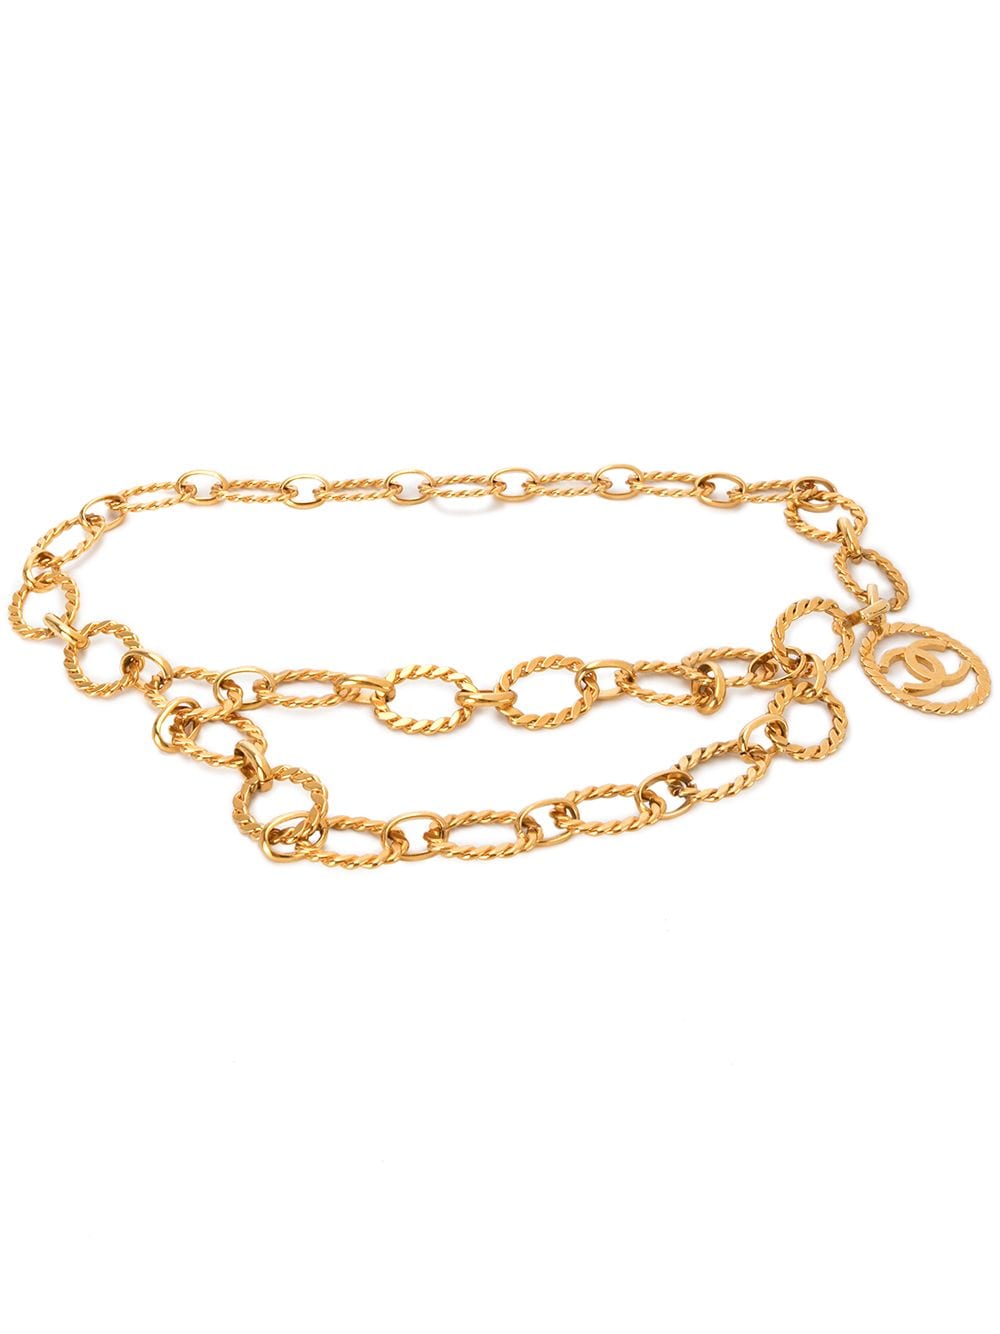 Chanel 1990s CC Charm Chain belt  Rent Chanel jewelry for $195/month